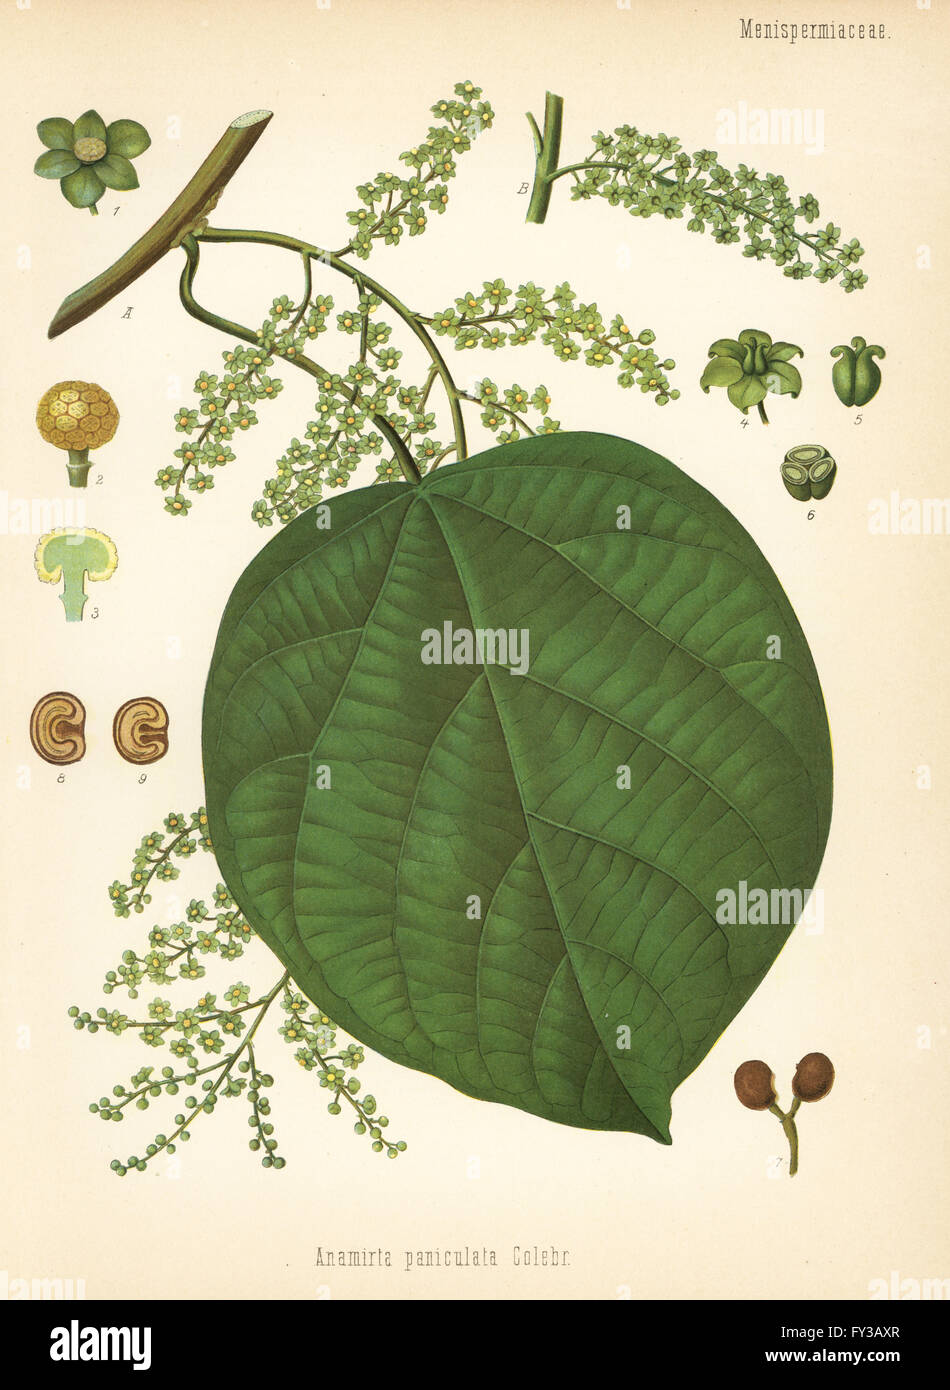 Indian berry tree, Anamirta cocculus (Anamirta paniculata) with Cocculus indicus fruit. Chromolithograph after a botanical illustration from Hermann Adolph Koehler's Medicinal Plants, edited by Gustav Pabst, Koehler, Germany, 1887. Stock Photo